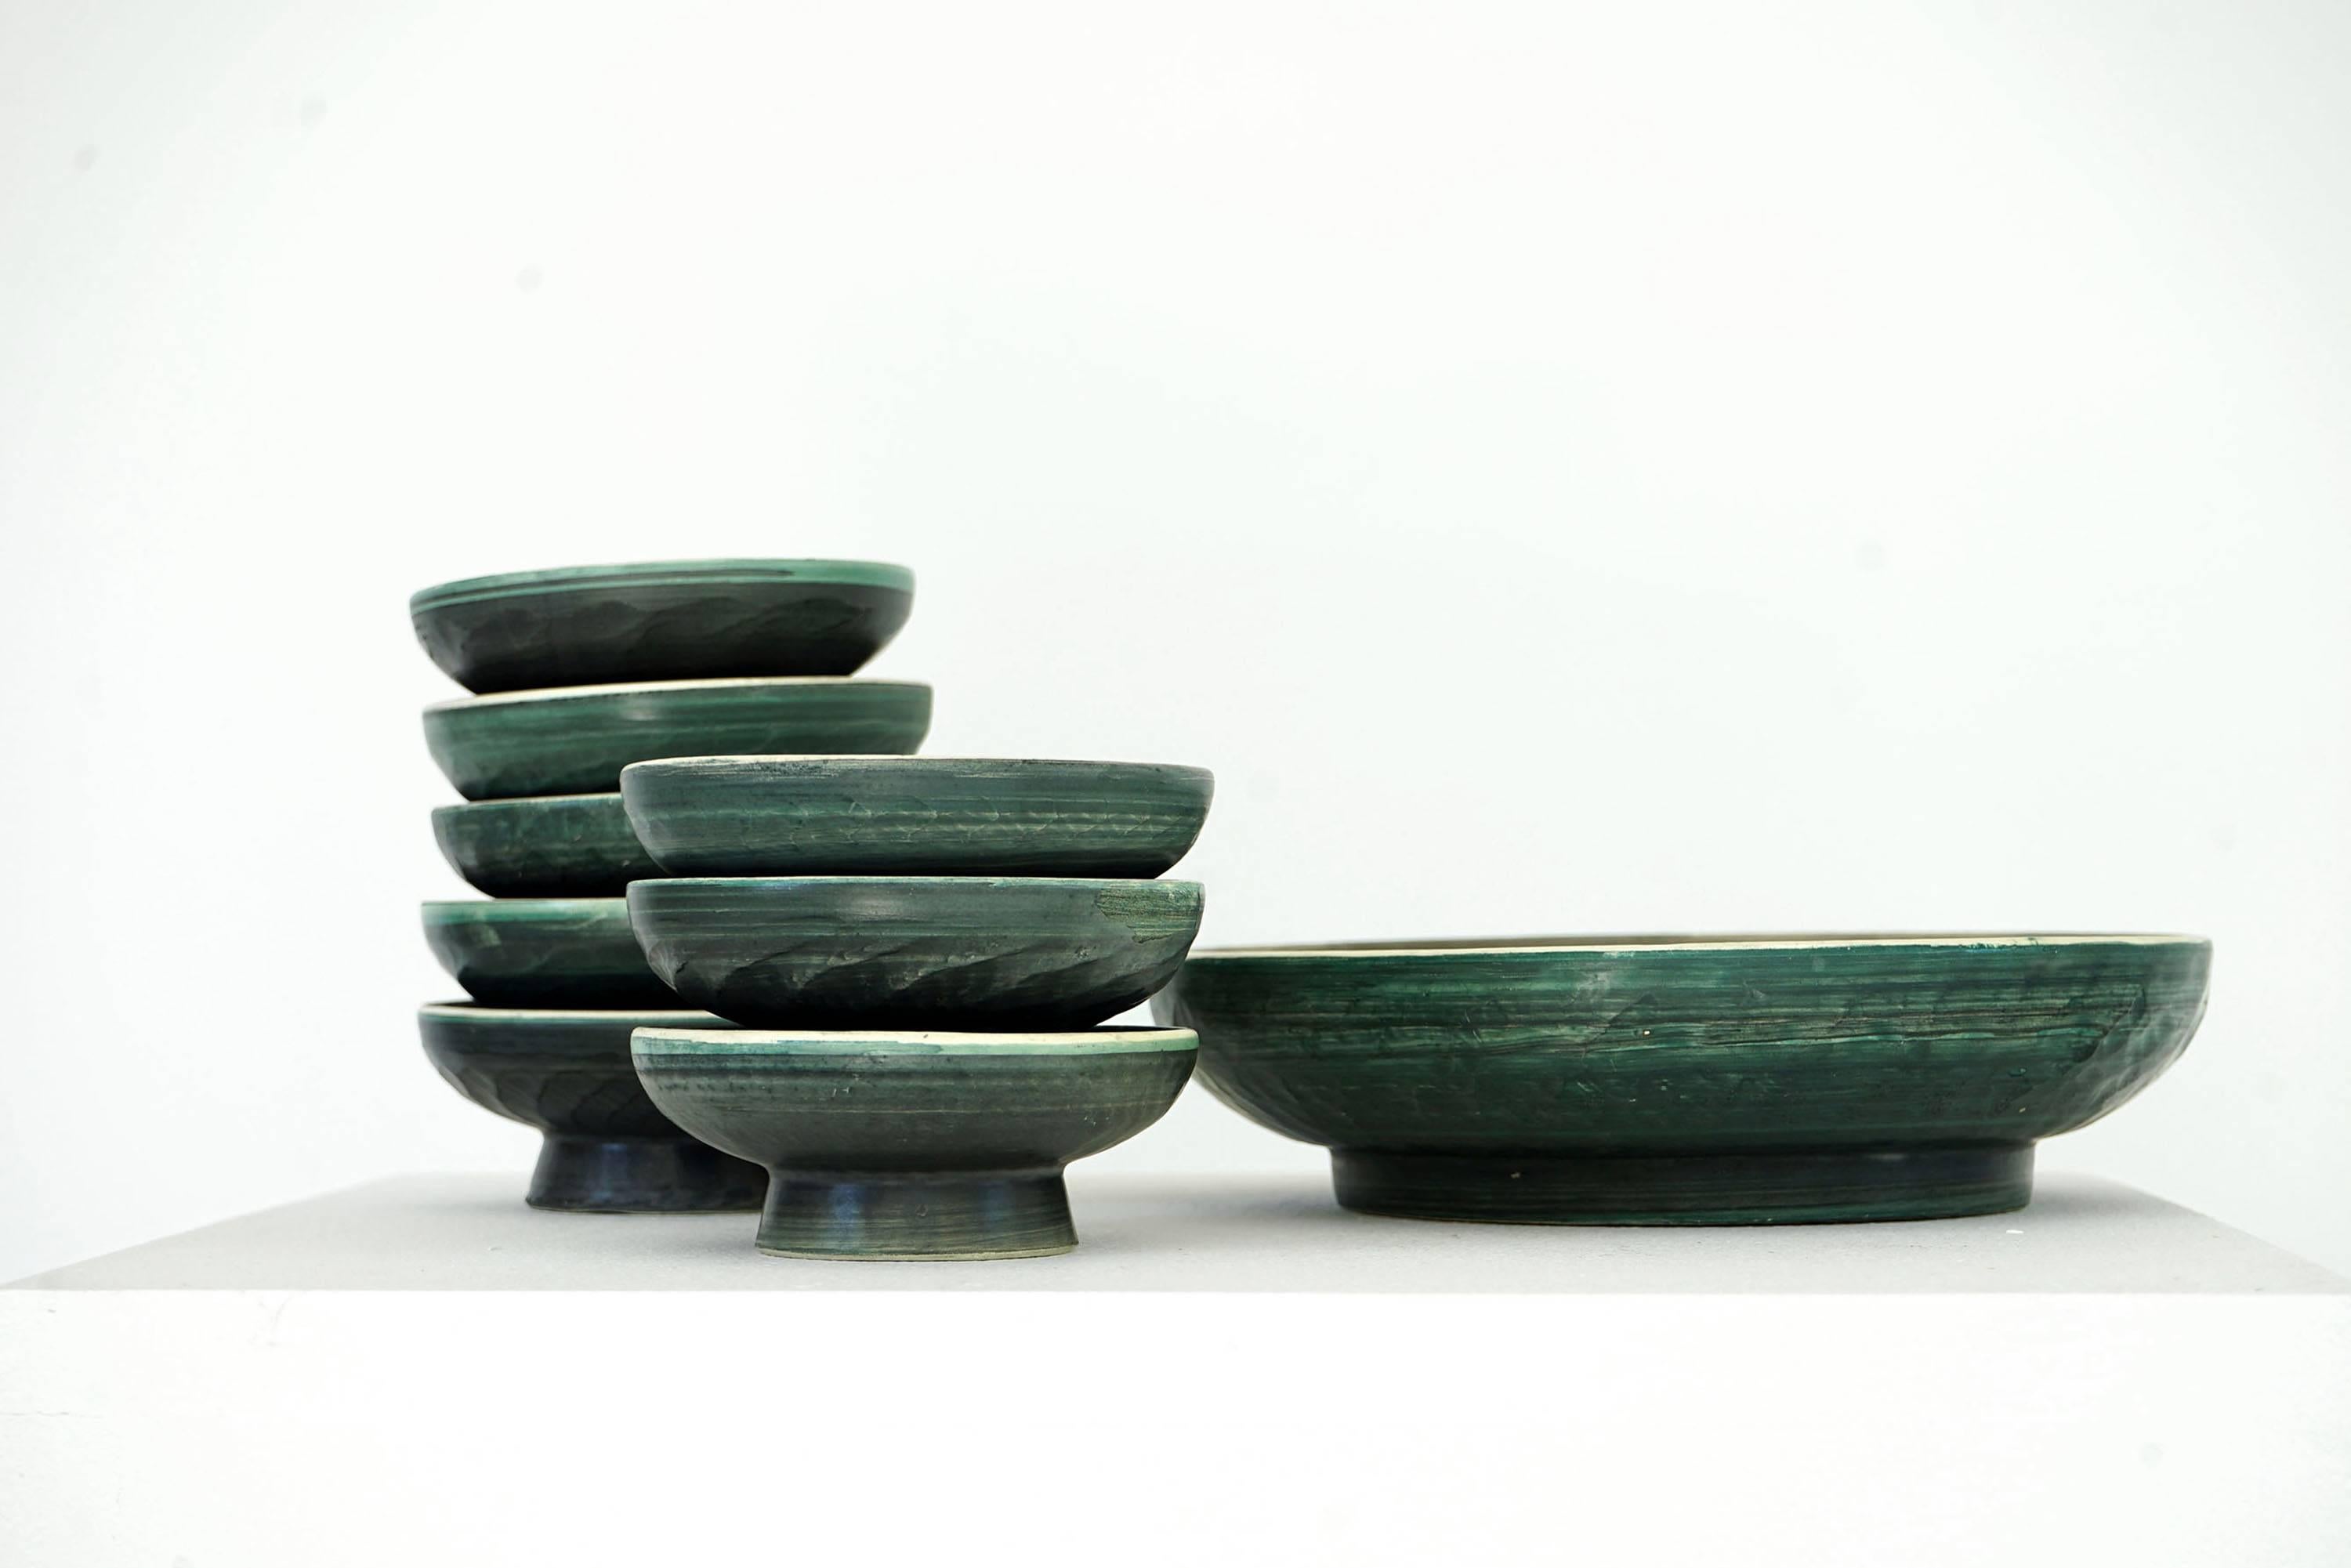 Set of Handmade Ceramic Bowls by Tapis Vert in Vallauris, 1950s For Sale 1